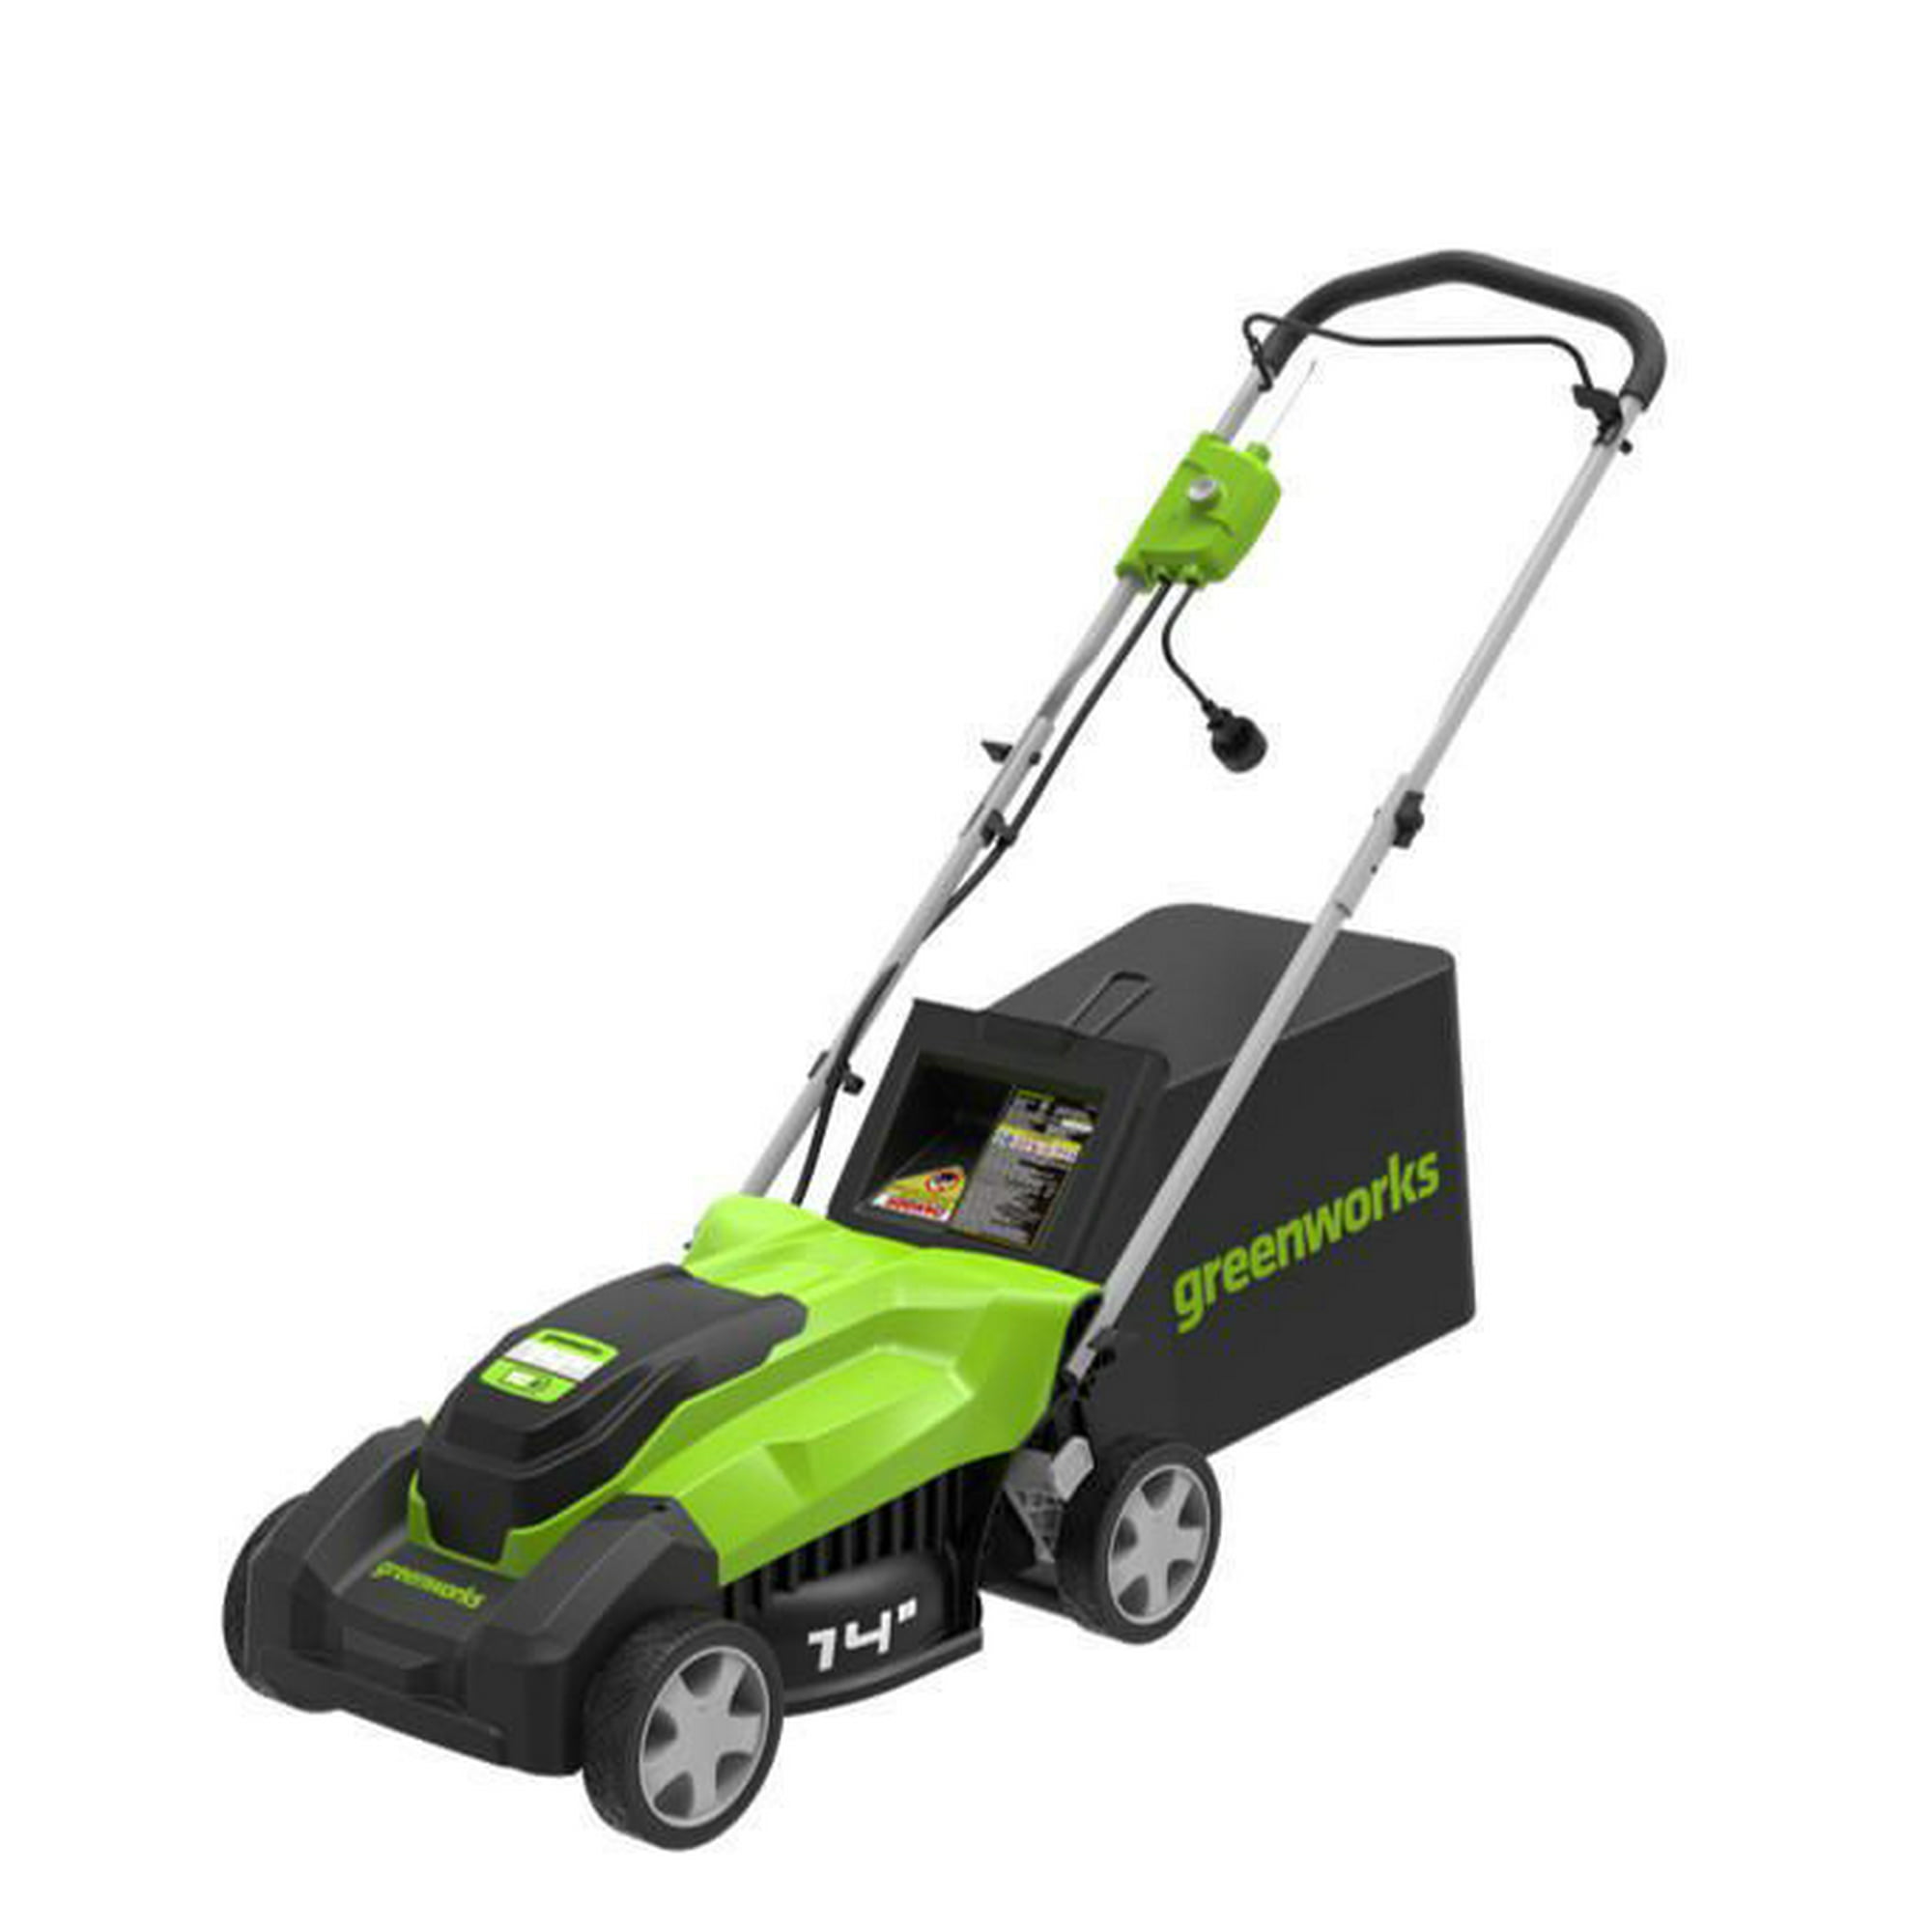 Greenworks 18 Inch. Reel Mower With Bag for Sale in Issaquah, WA